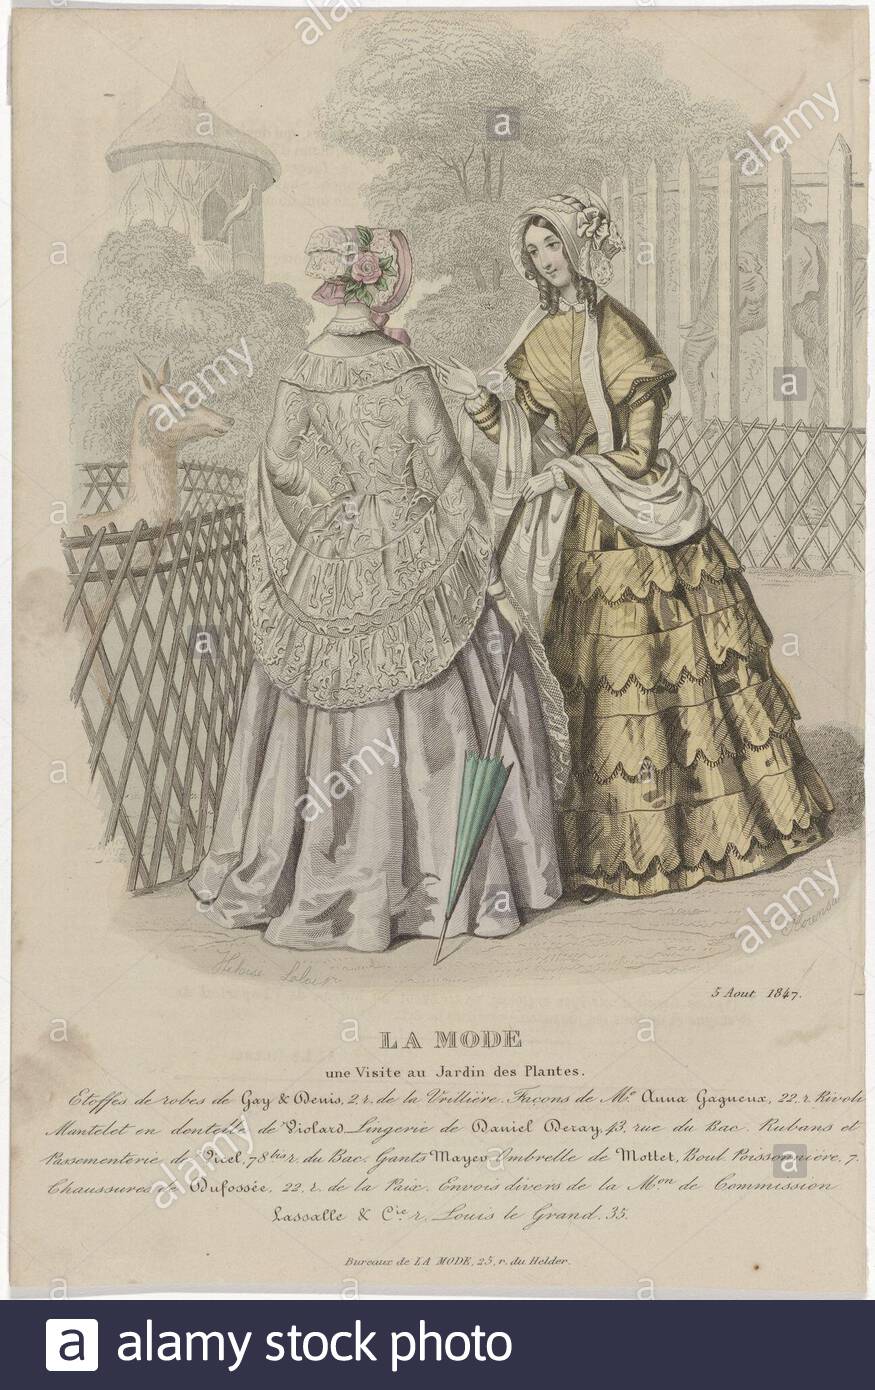 two women visit the botanical garden or zoo le jardin des plantes in paris according to the caption fabrics of dresses denis performed in the manner of anna gagueux mantelet small tippet in side violard here are some rules text advertising for various products print out the fashion magazine la mode 1829 1855 manufacturer printmaker florensa the closmenil listed property to drawing heloise leloir colin listed property place manufacture paris date 1847 physical features engra hand colored material paper technique engra printing process hand color measurement 2B